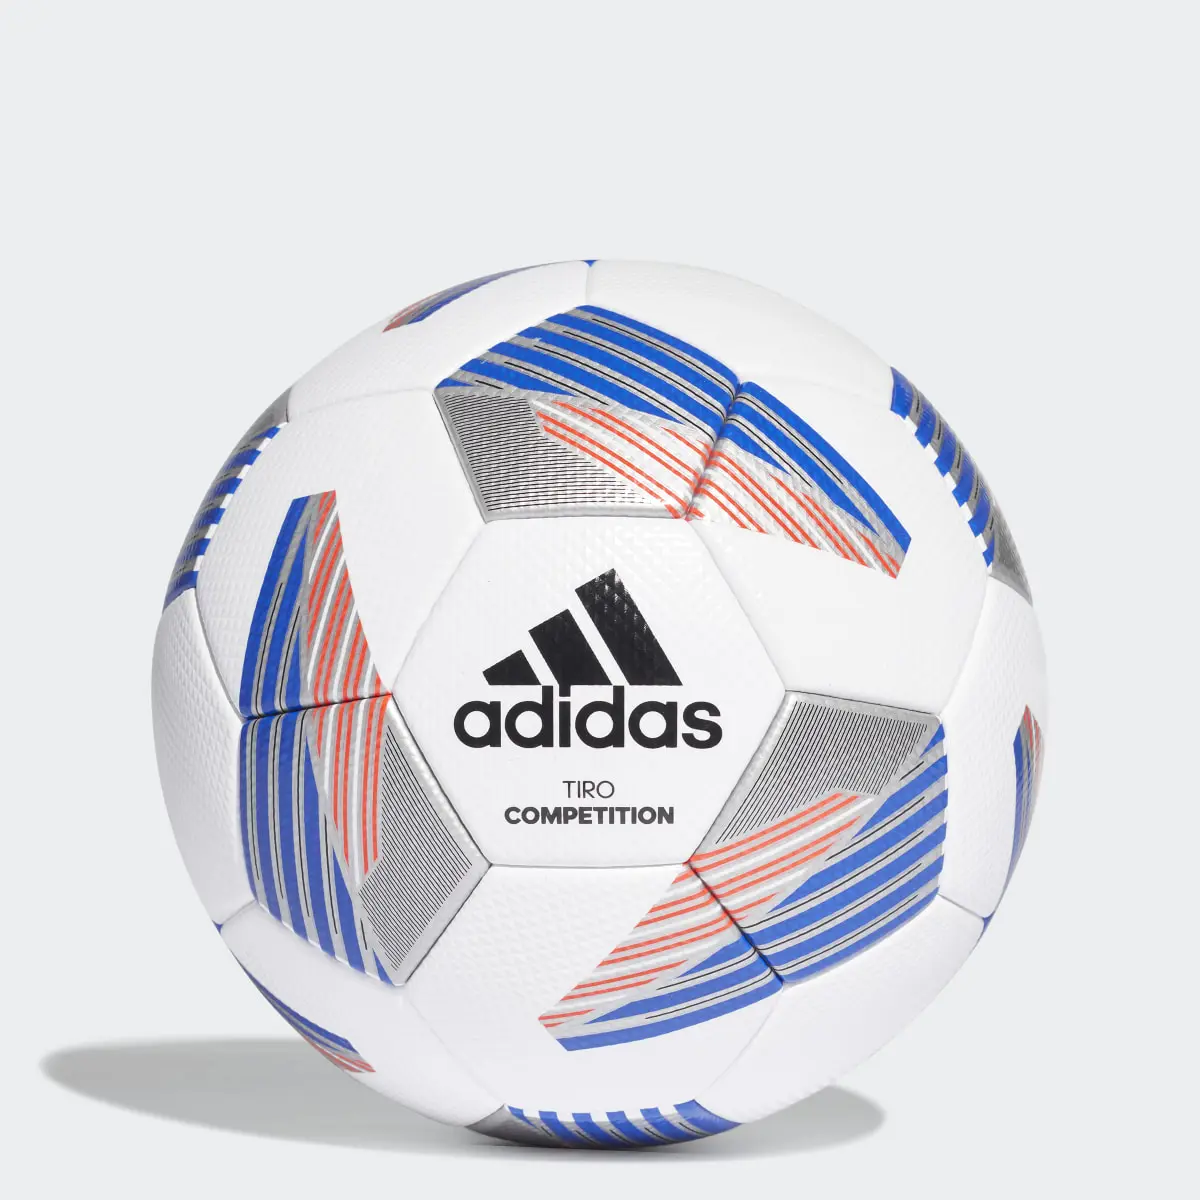 Adidas Team Competition Ball. 1